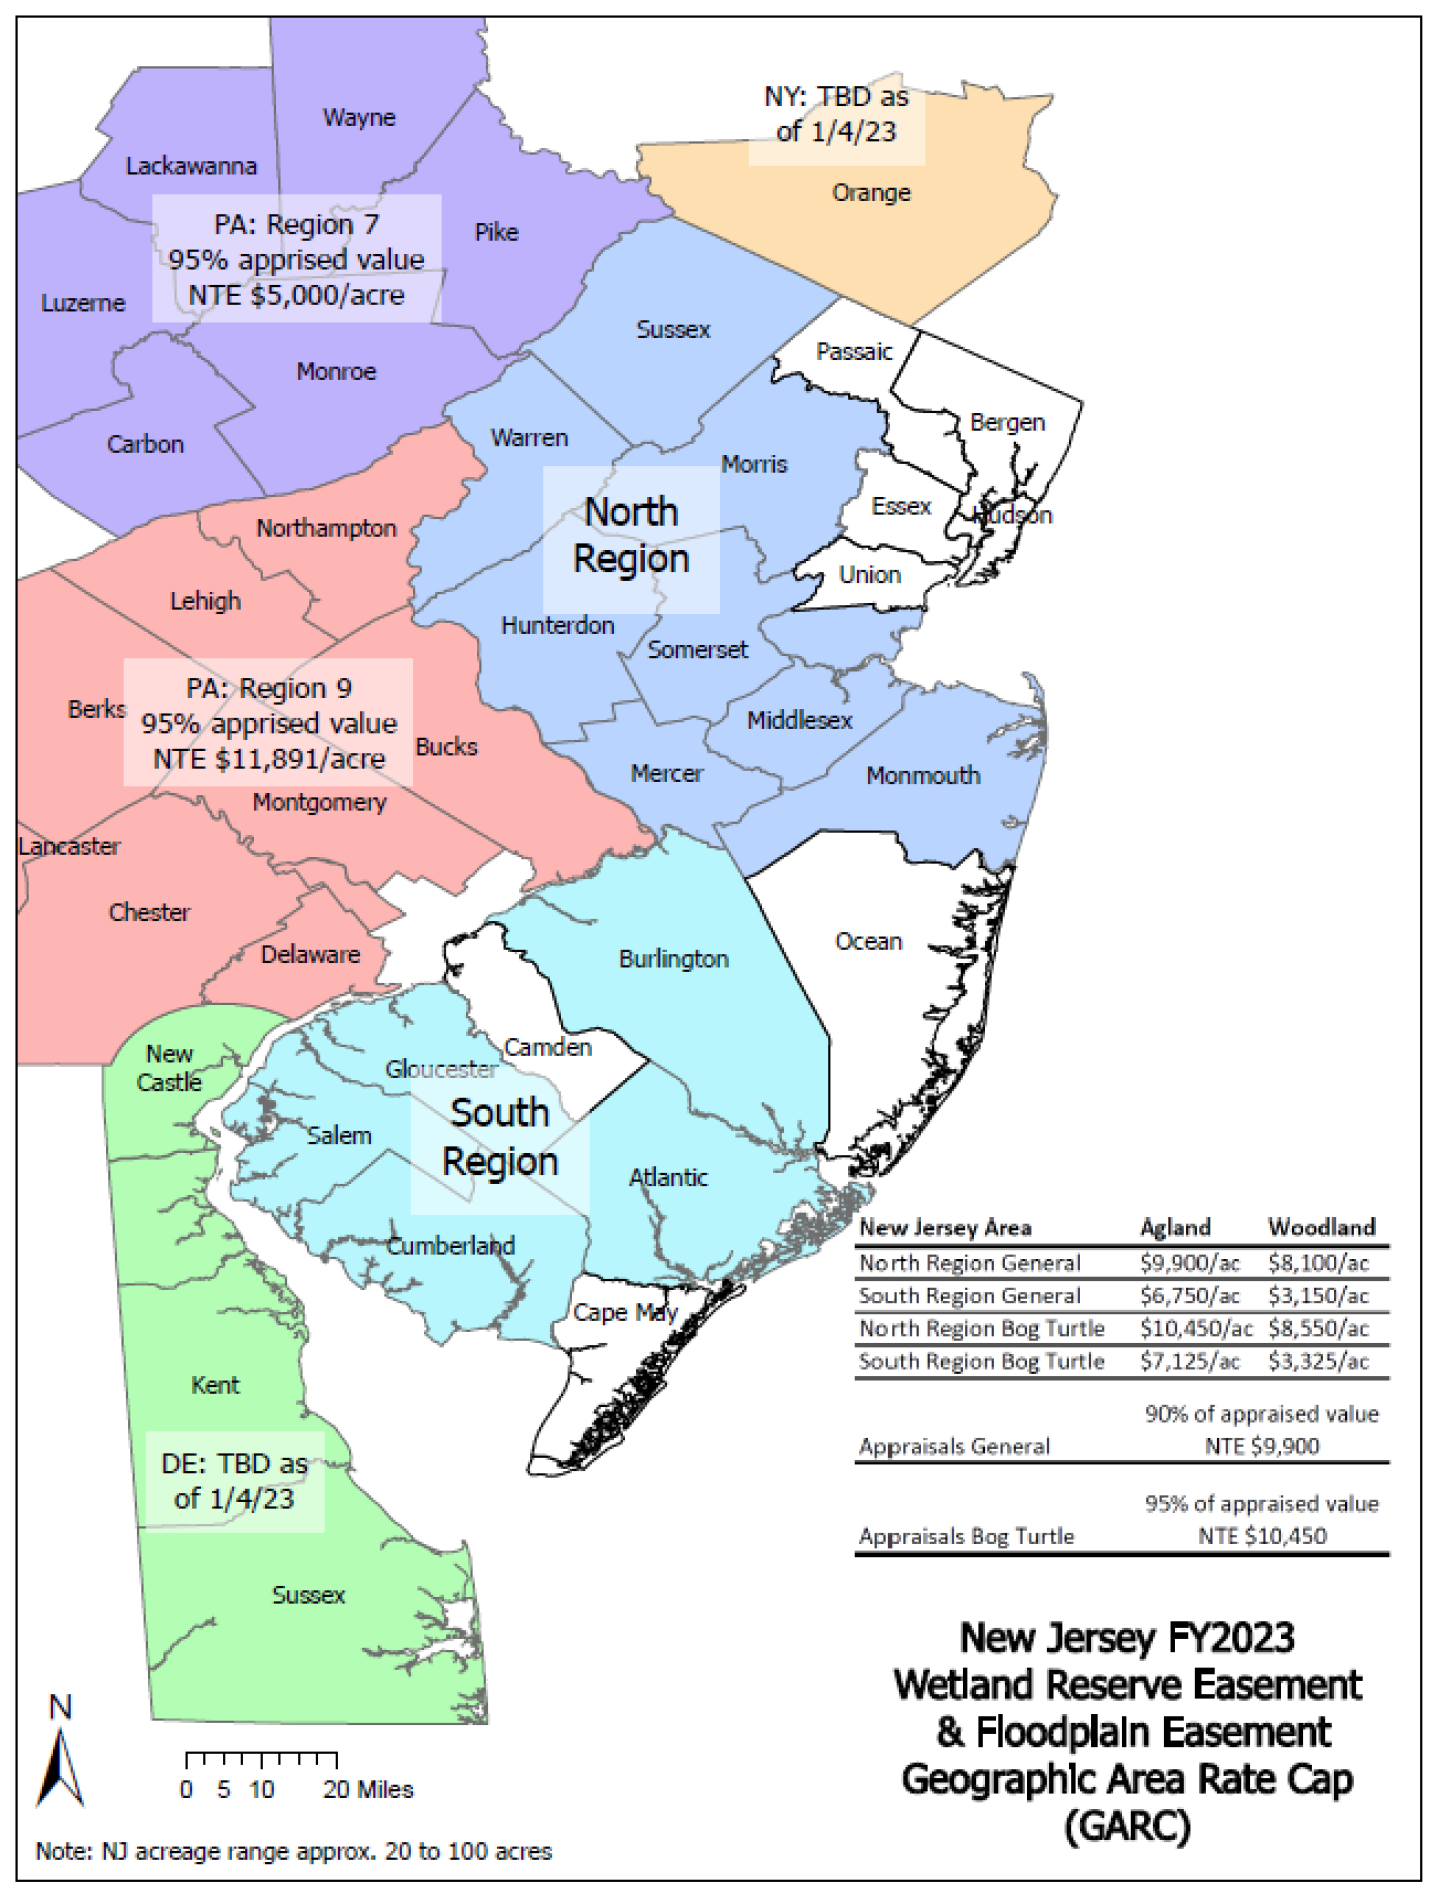 Geographic Area Rate Cap Information for NJ 